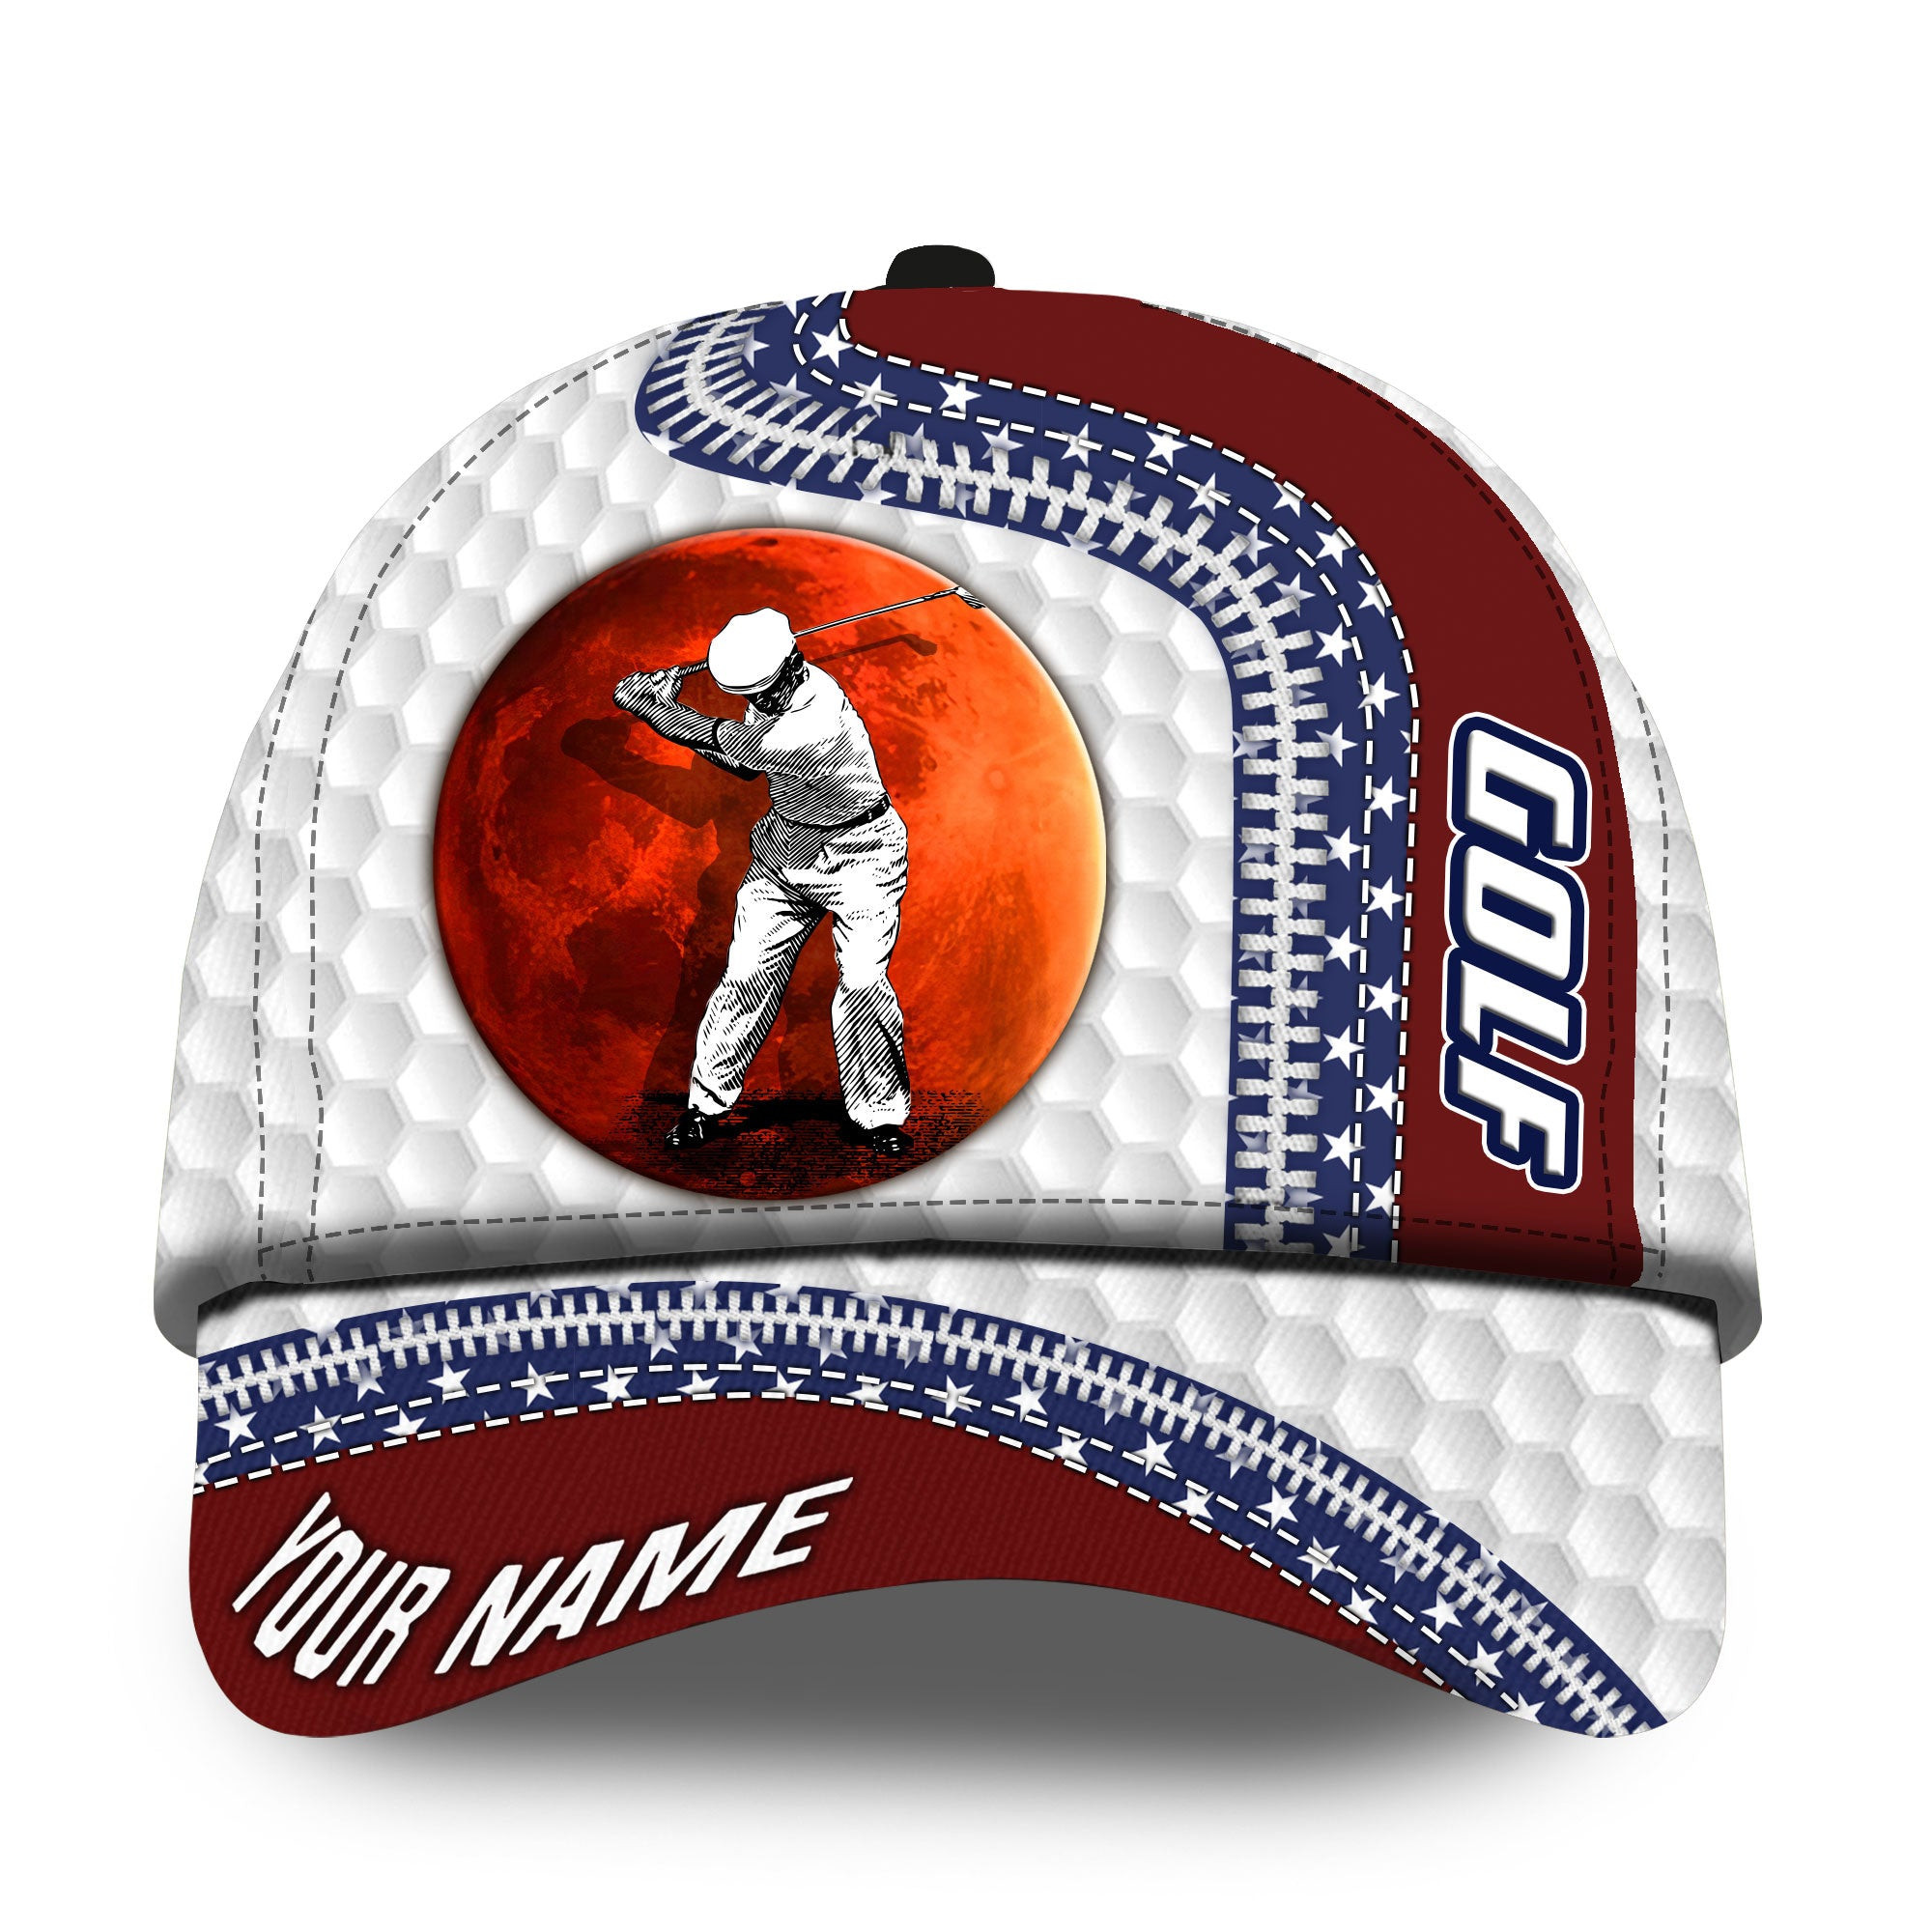 American Man Plays Golf Multicolored Personalized Cap Golf Hats For Golf Lovers Personalized Classic Cap